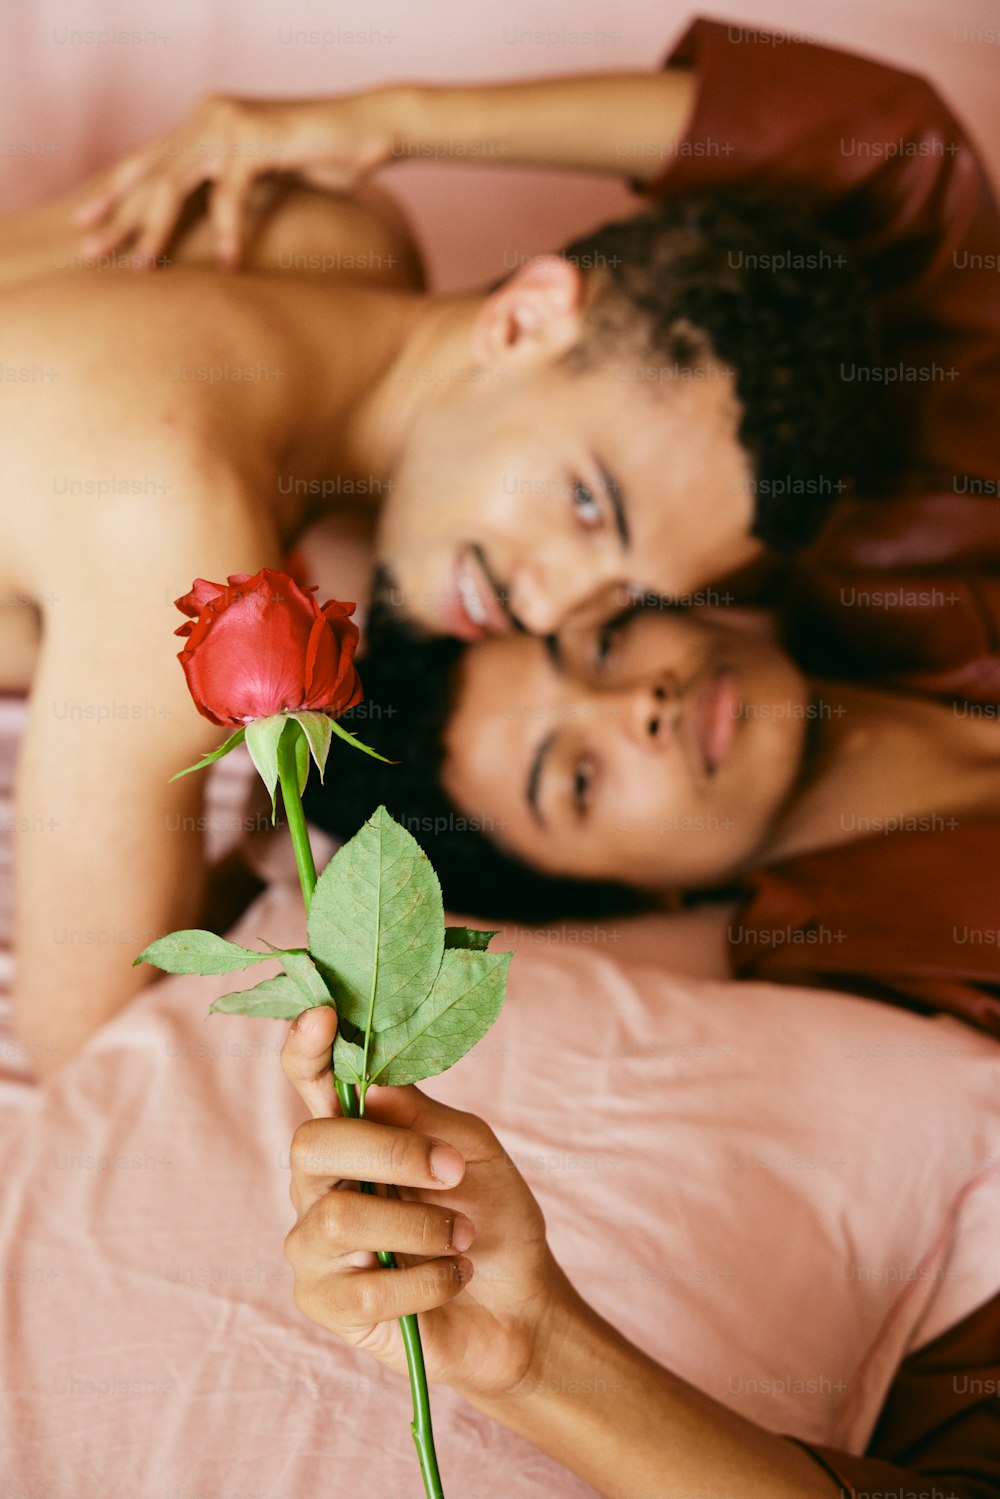 a man laying in bed next to a woman holding a rose